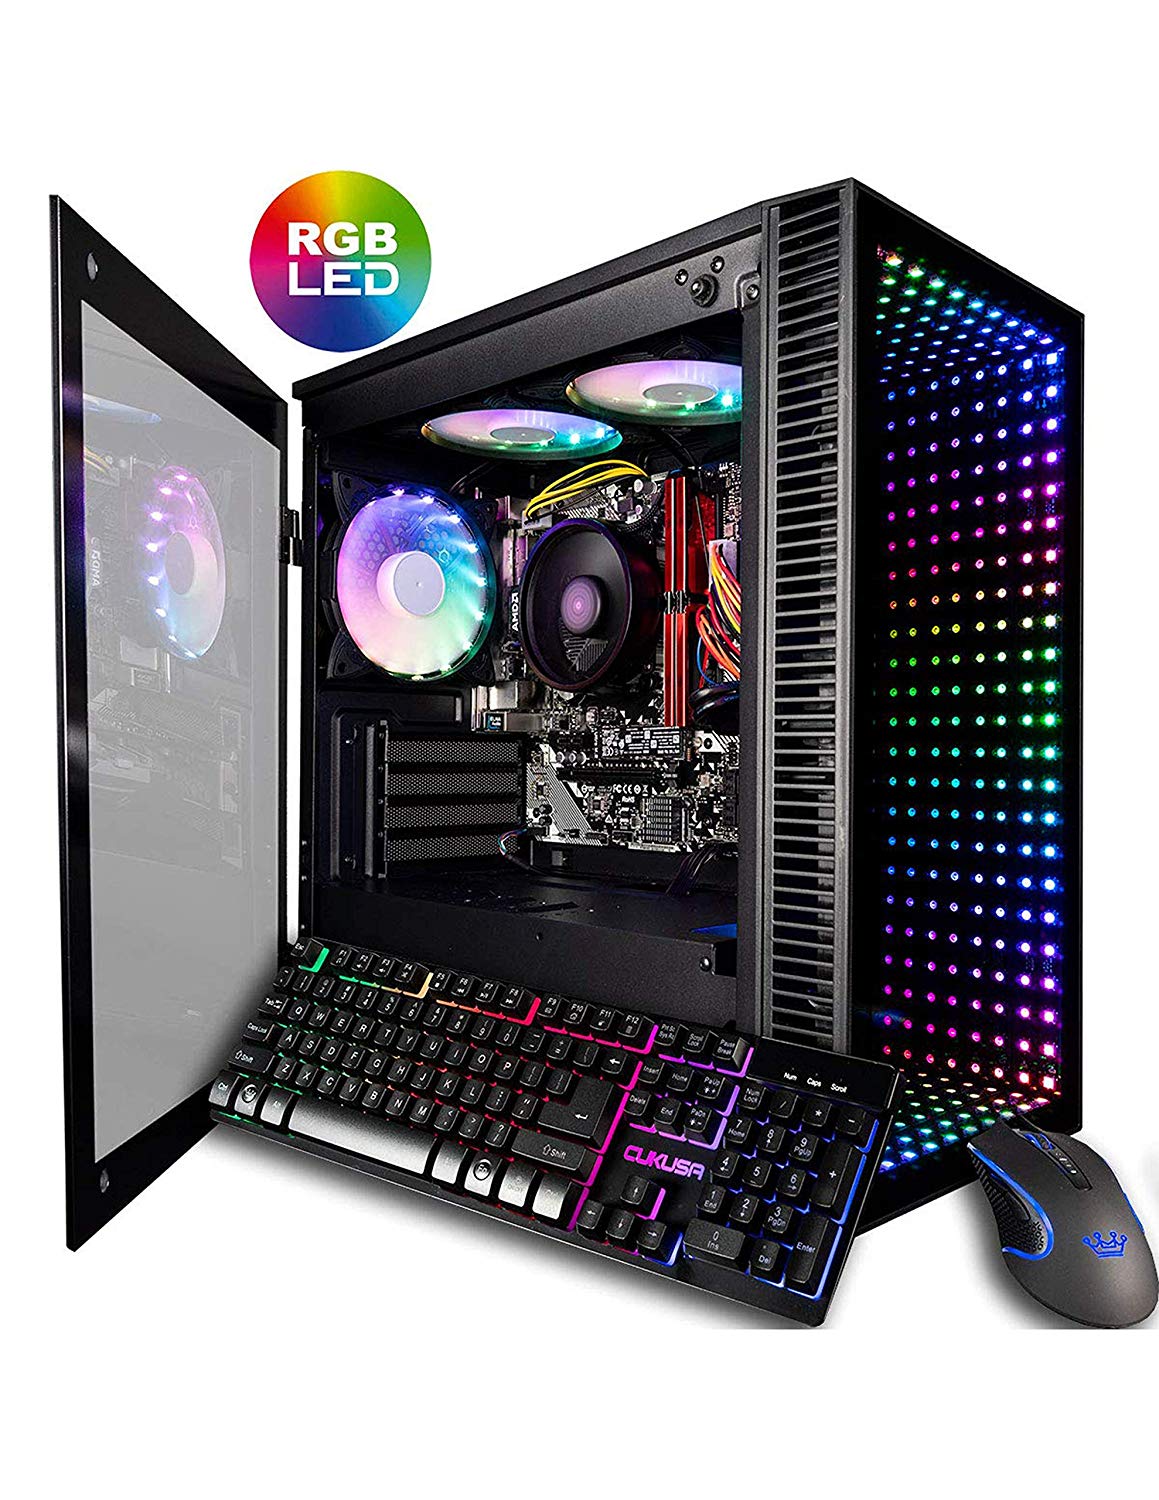 Best $400 Gaming PC: CHEAP 2019 Build (CONSOLE KILLER!!)